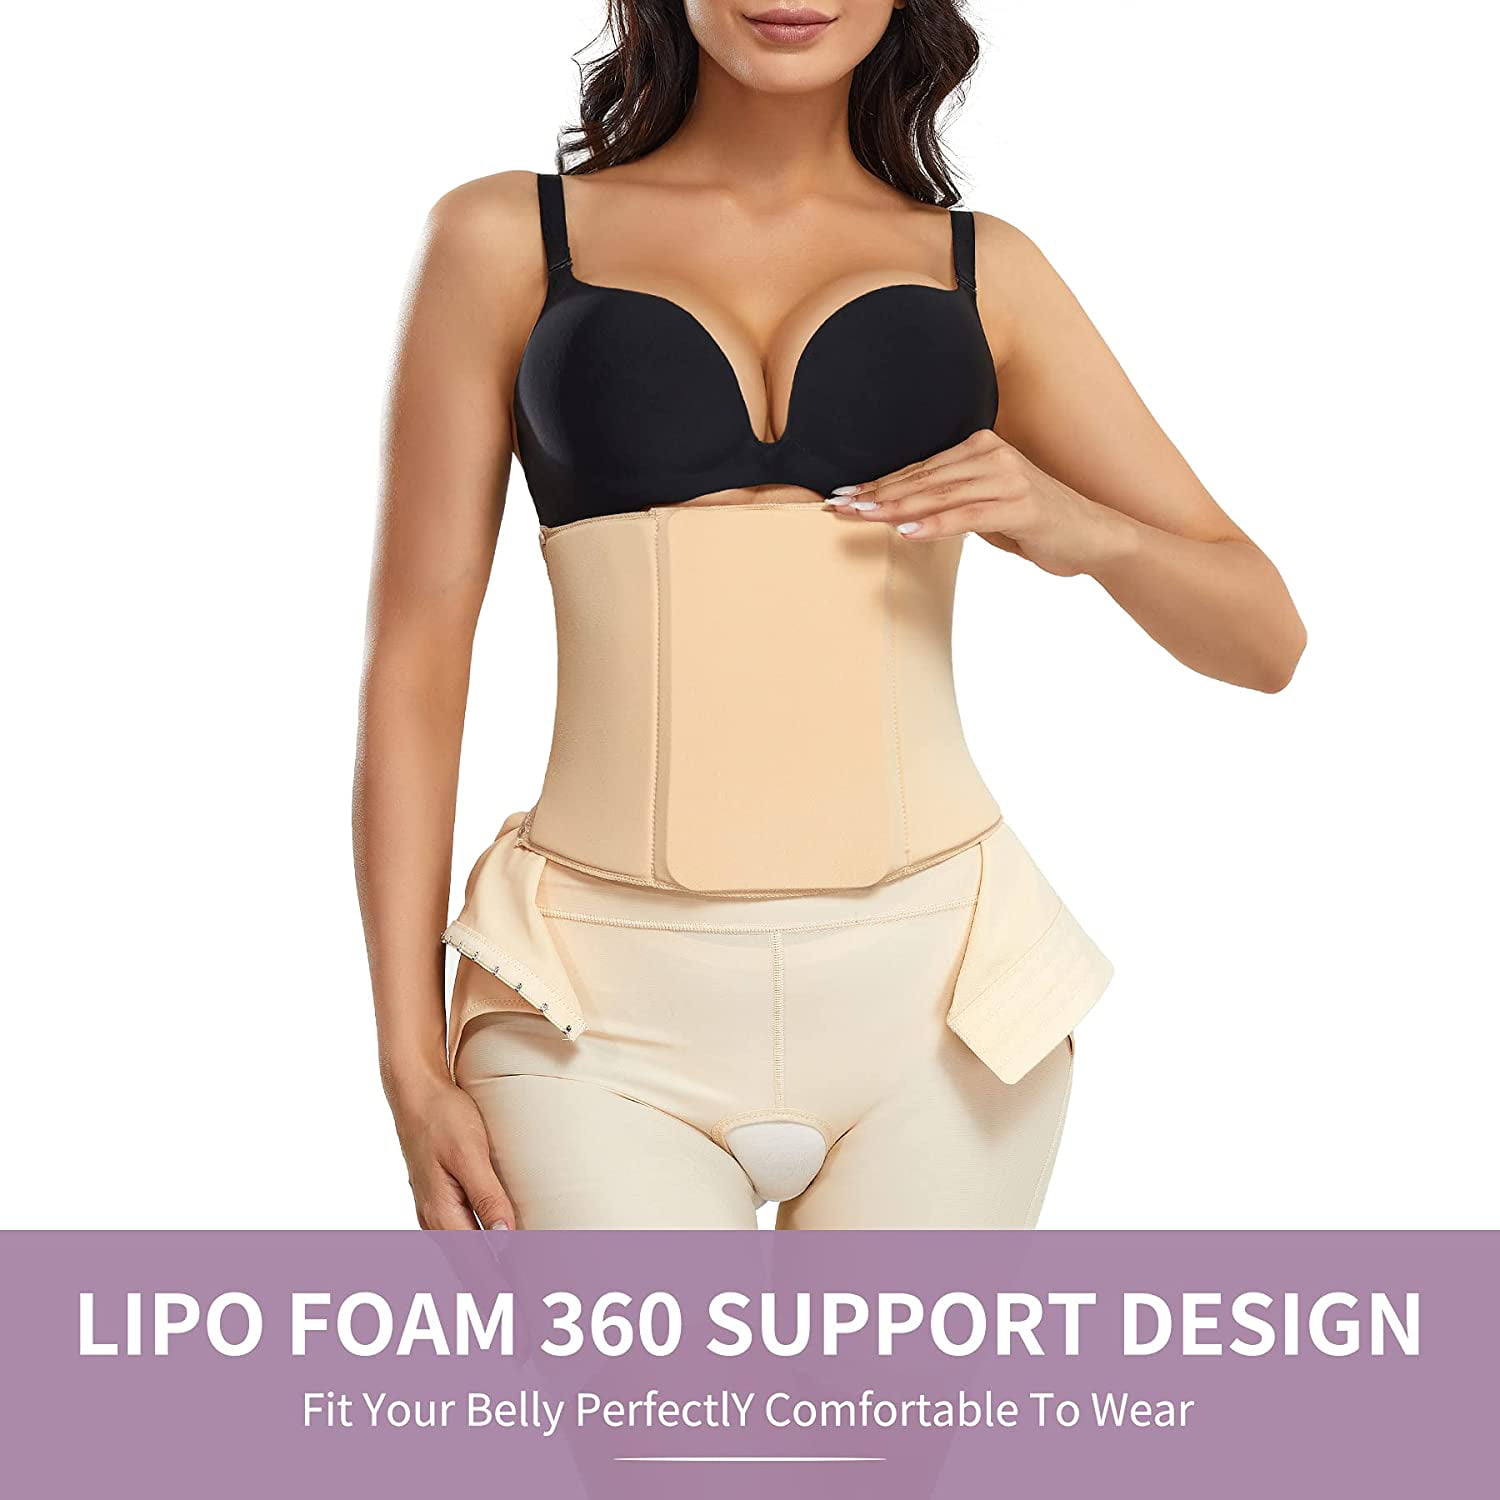 Fajabonita Curve it up. - Lipo Foam provides uniform compression over  suctioned area. It can be inserted between a garment and suctioned area.  #liposuctionsurgery #lipo #surgery